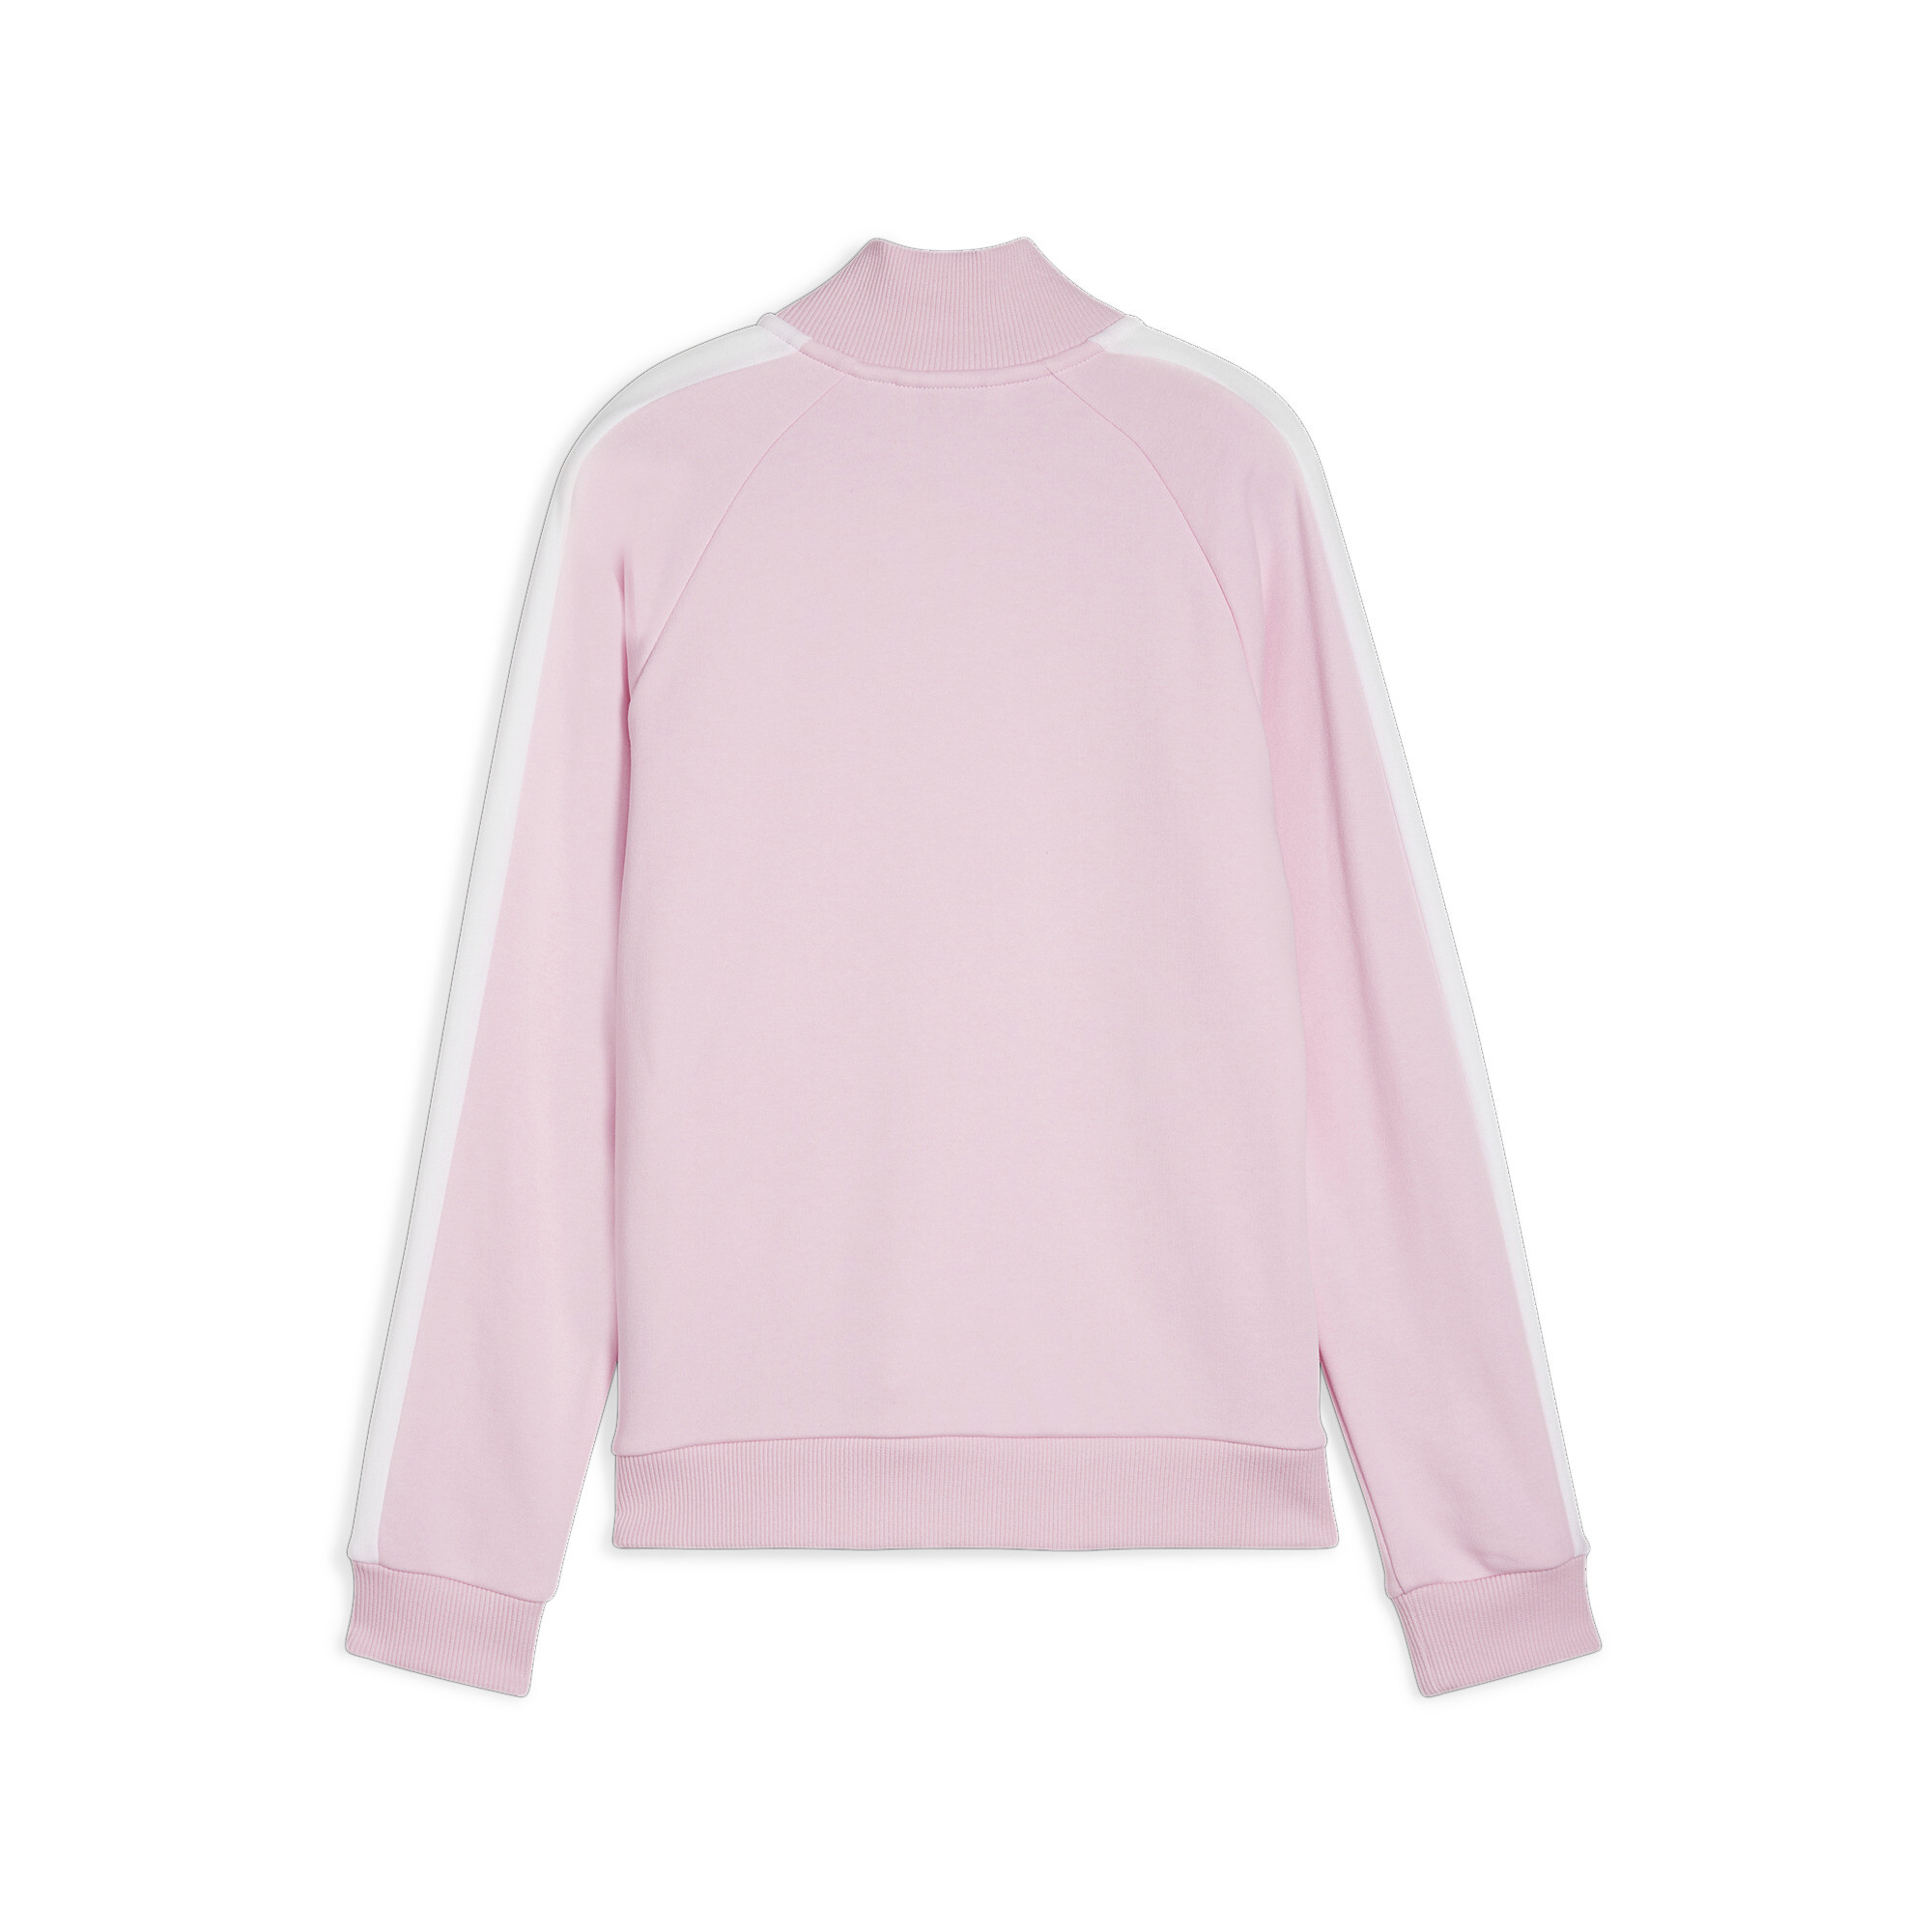 PUMA Classics T7 Track Jacket In Pink, Size 4-5 Youth